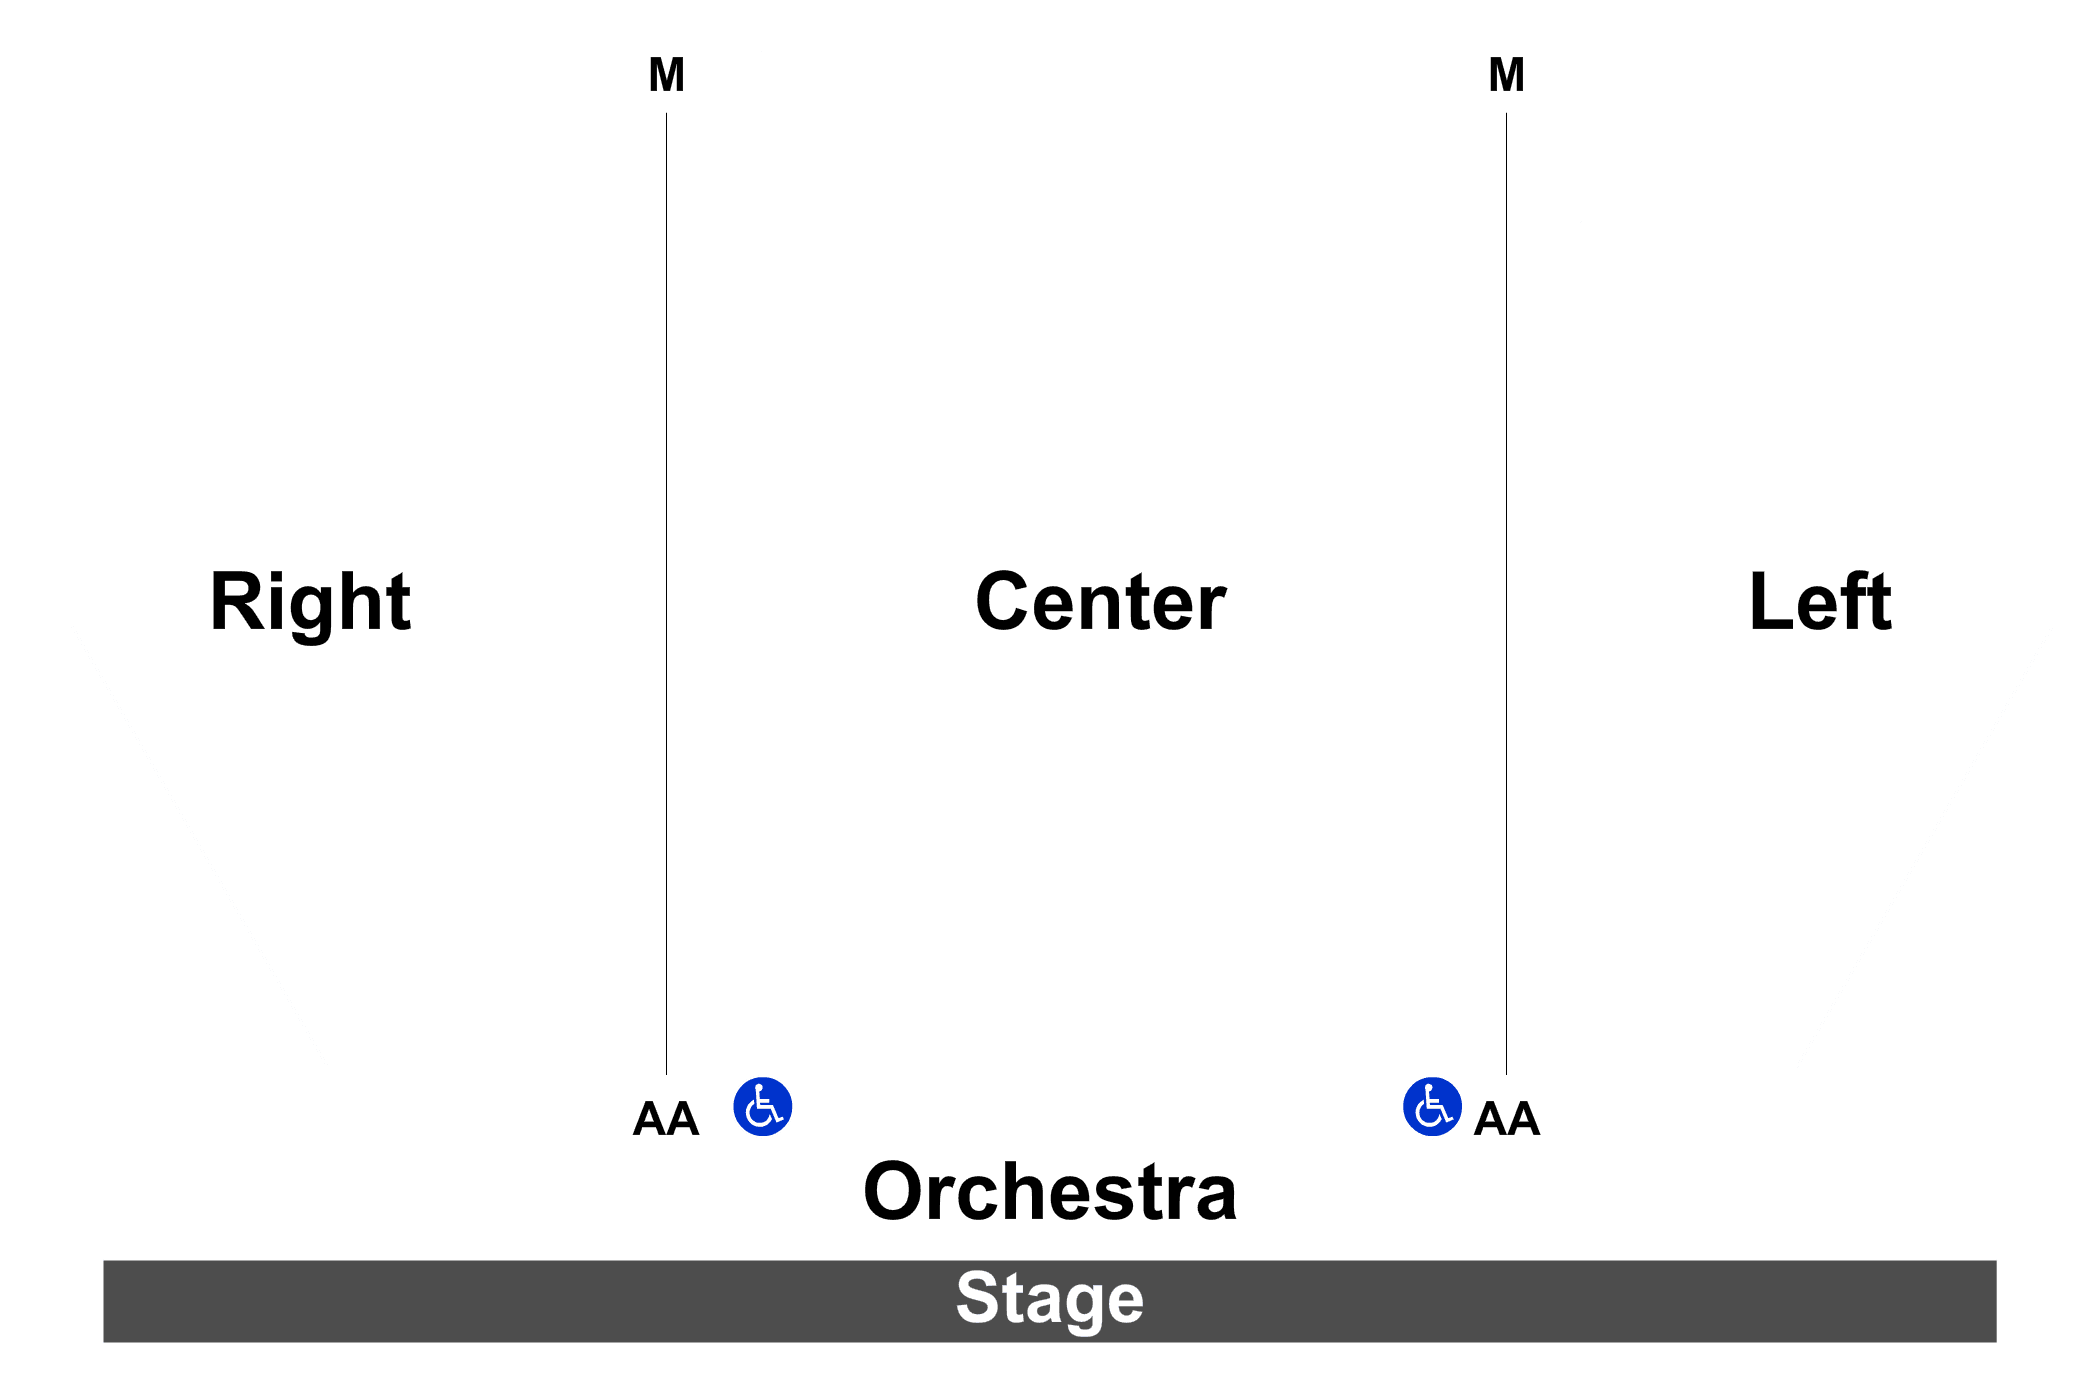 Mtc Stage 2 Seating Chart